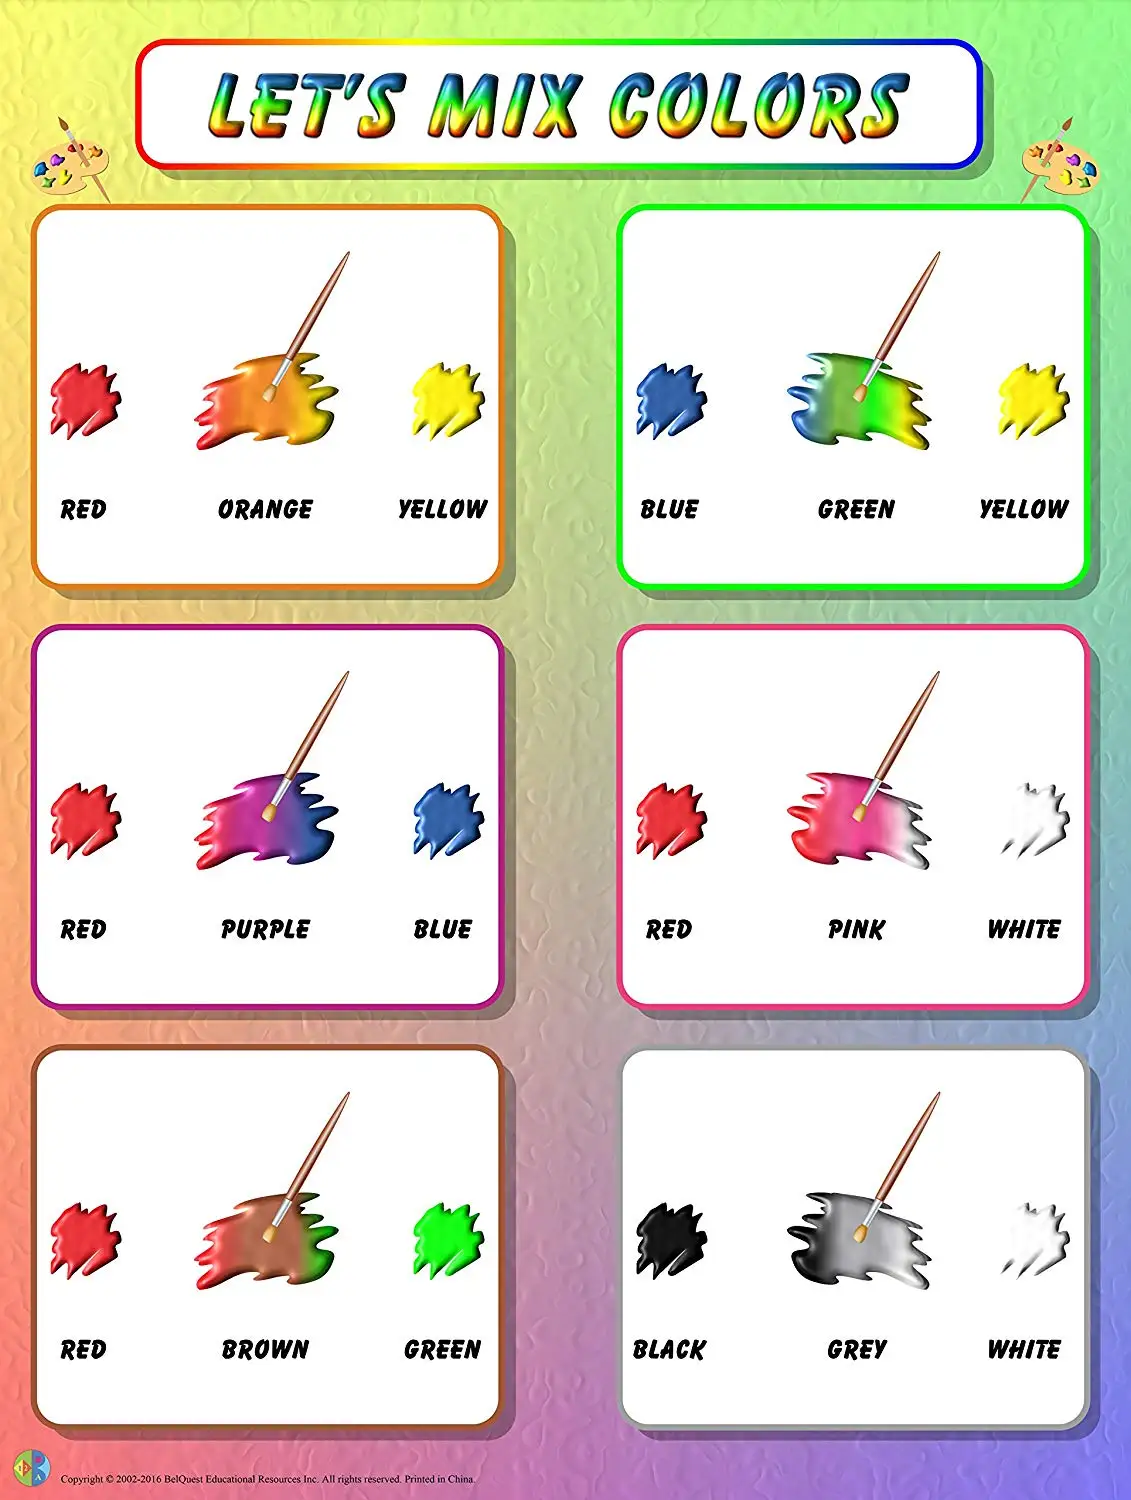 Americolor Color Mixing Chart